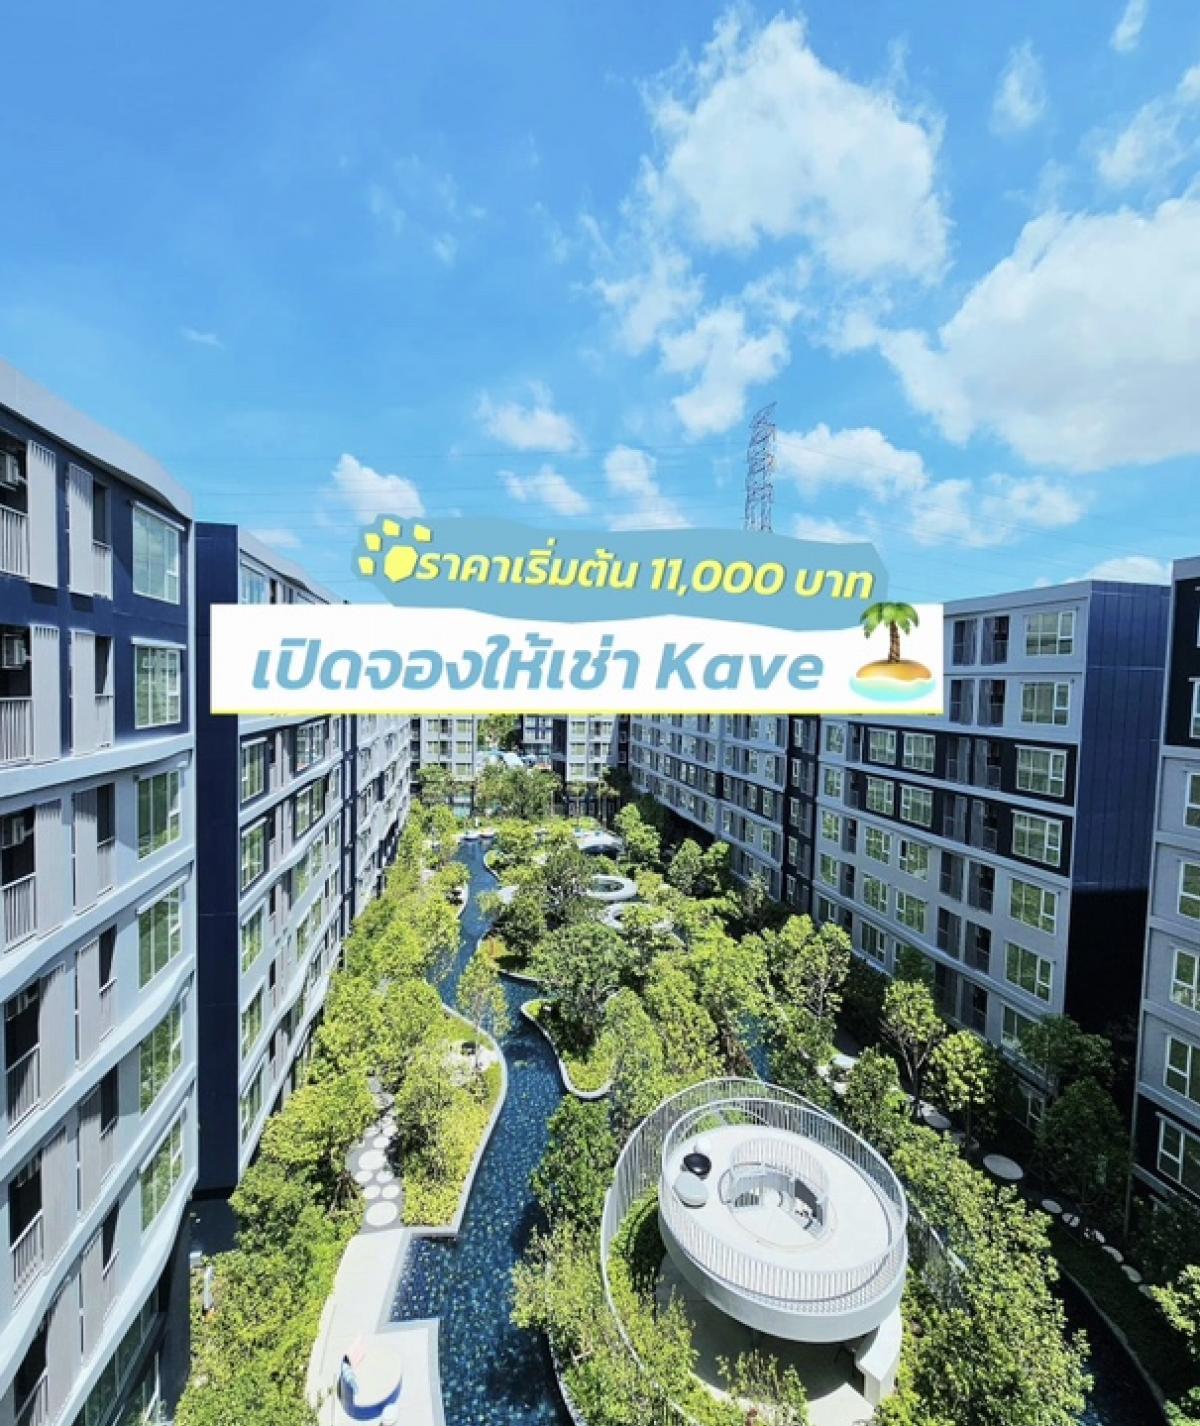 For RentCondoPathum Thani,Rangsit, Thammasat : Condo for rent, Kave Island, next to Bangkok University, cute, cute room, size 22.6 sq m and 25 sq m, price starting at just 11,000 baht.